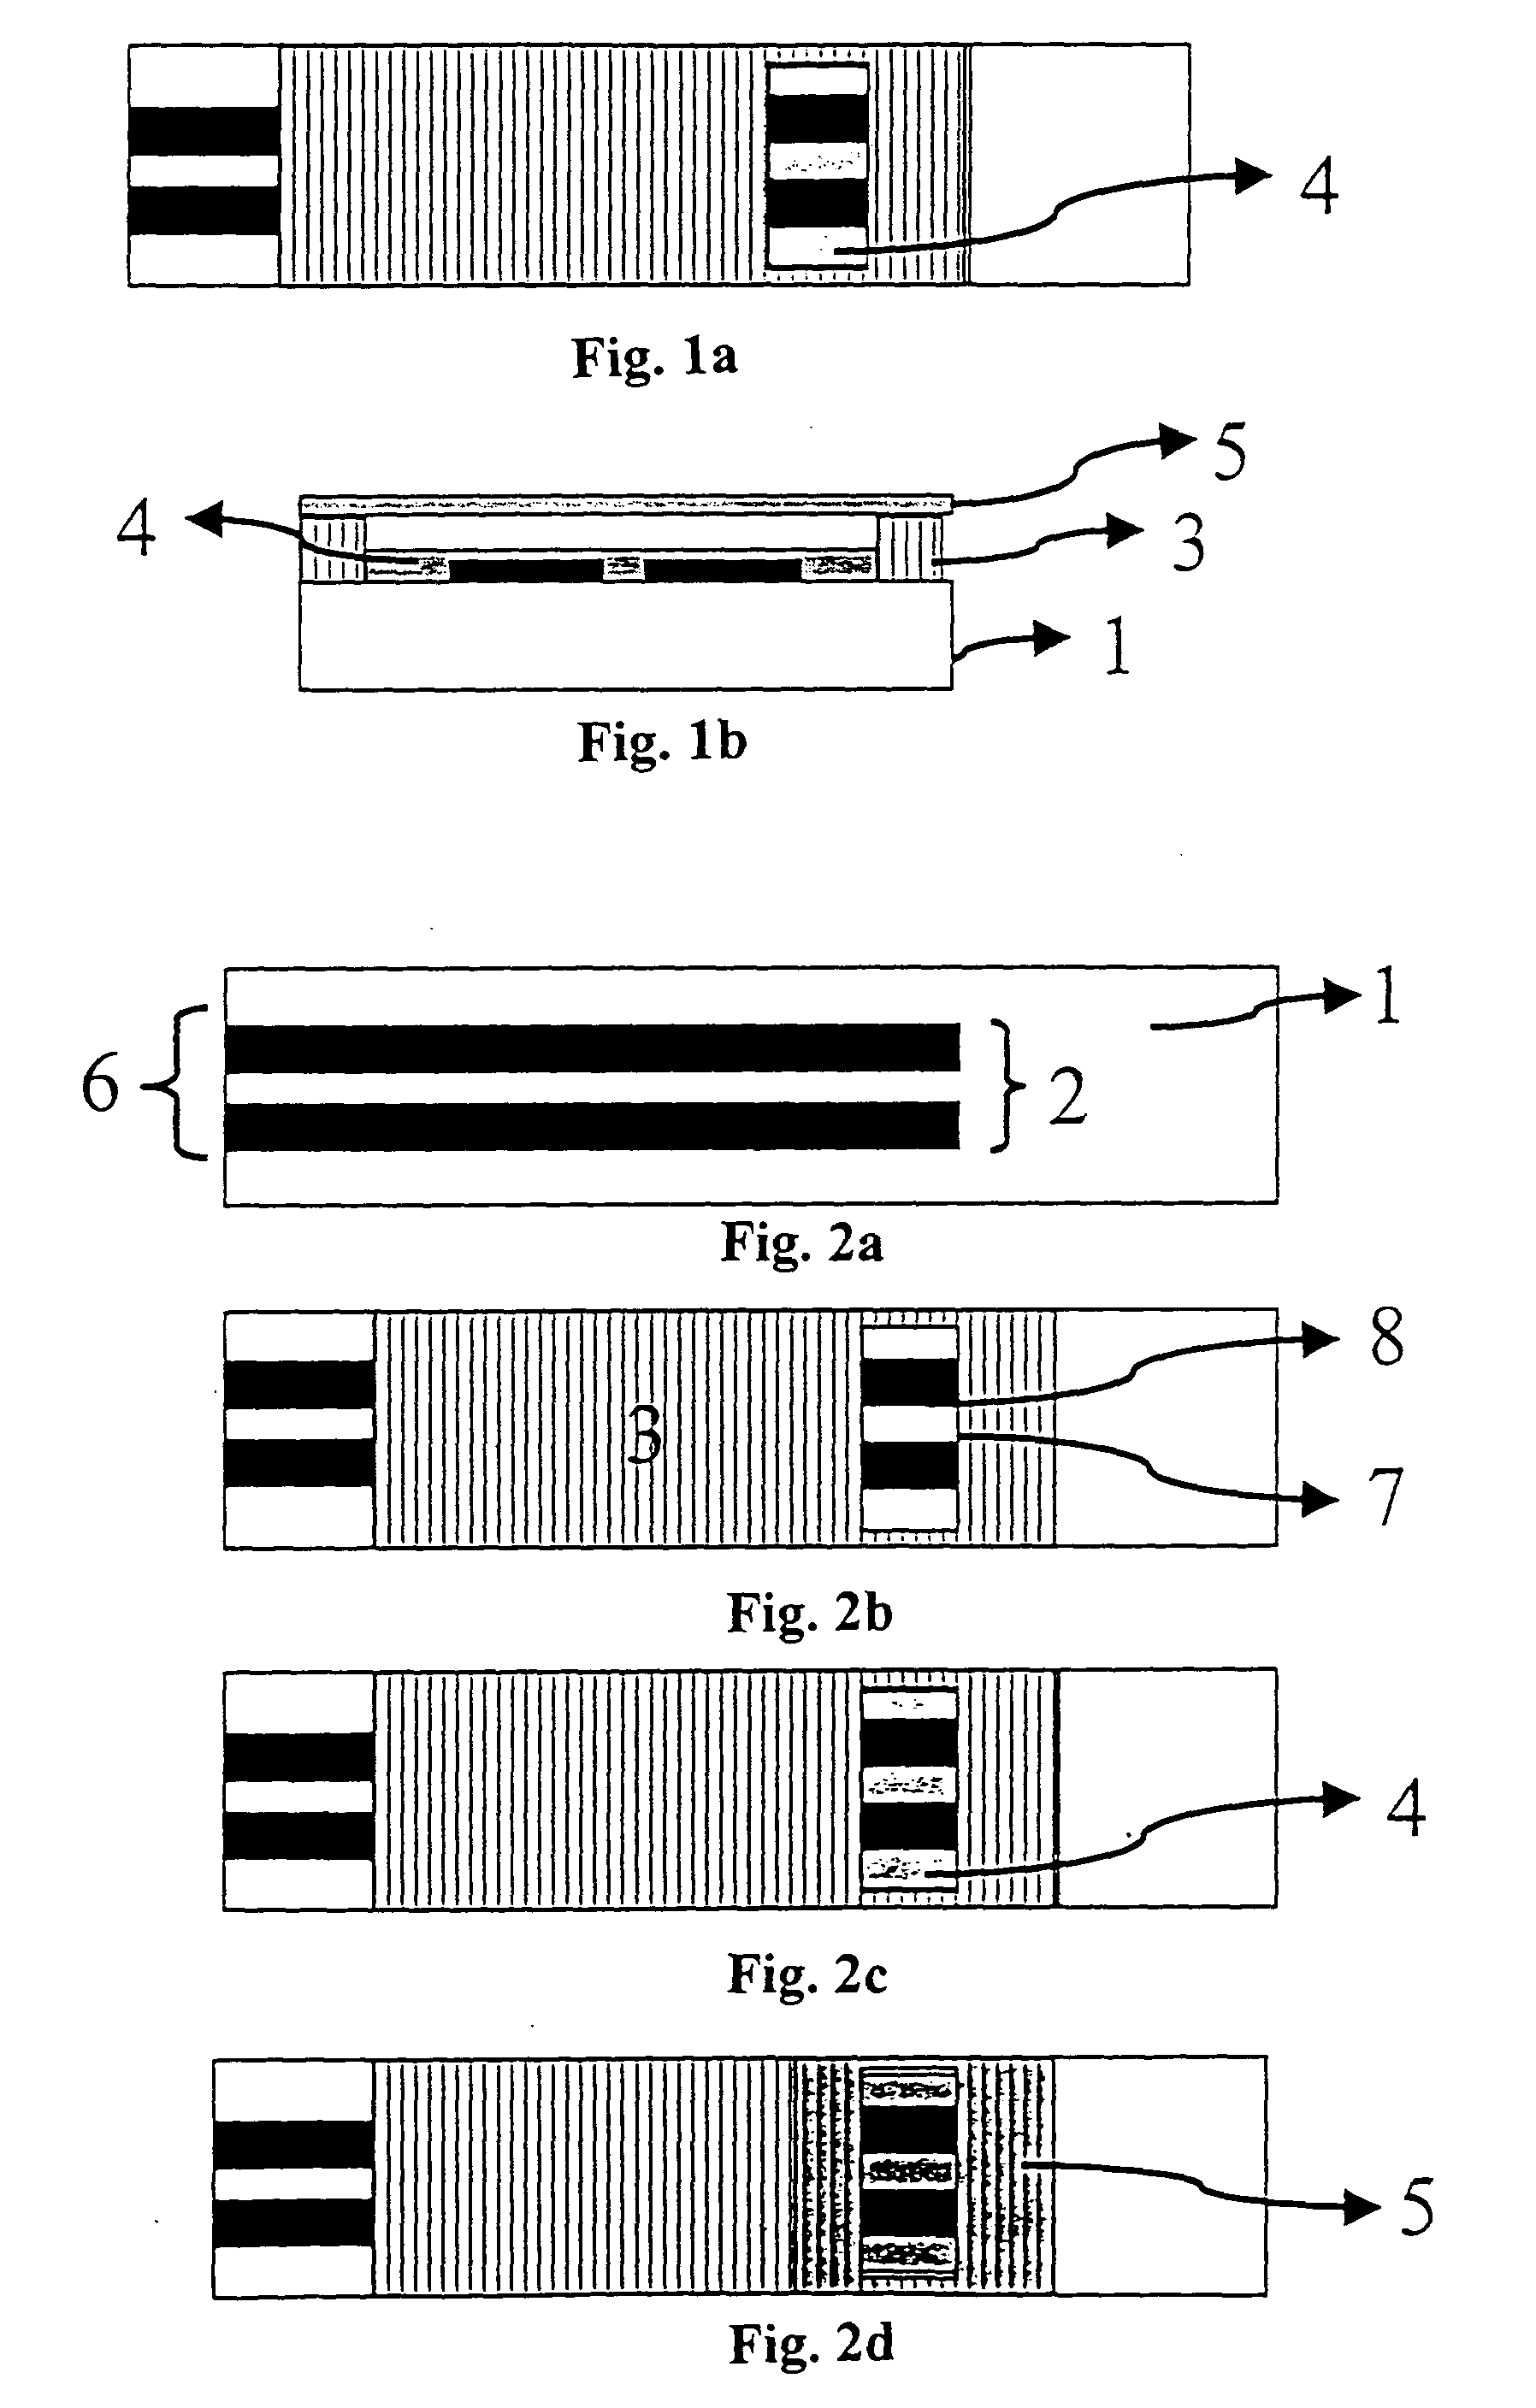 Method of producing whole blood detecting electrode strip and reaction film formulation and the related products